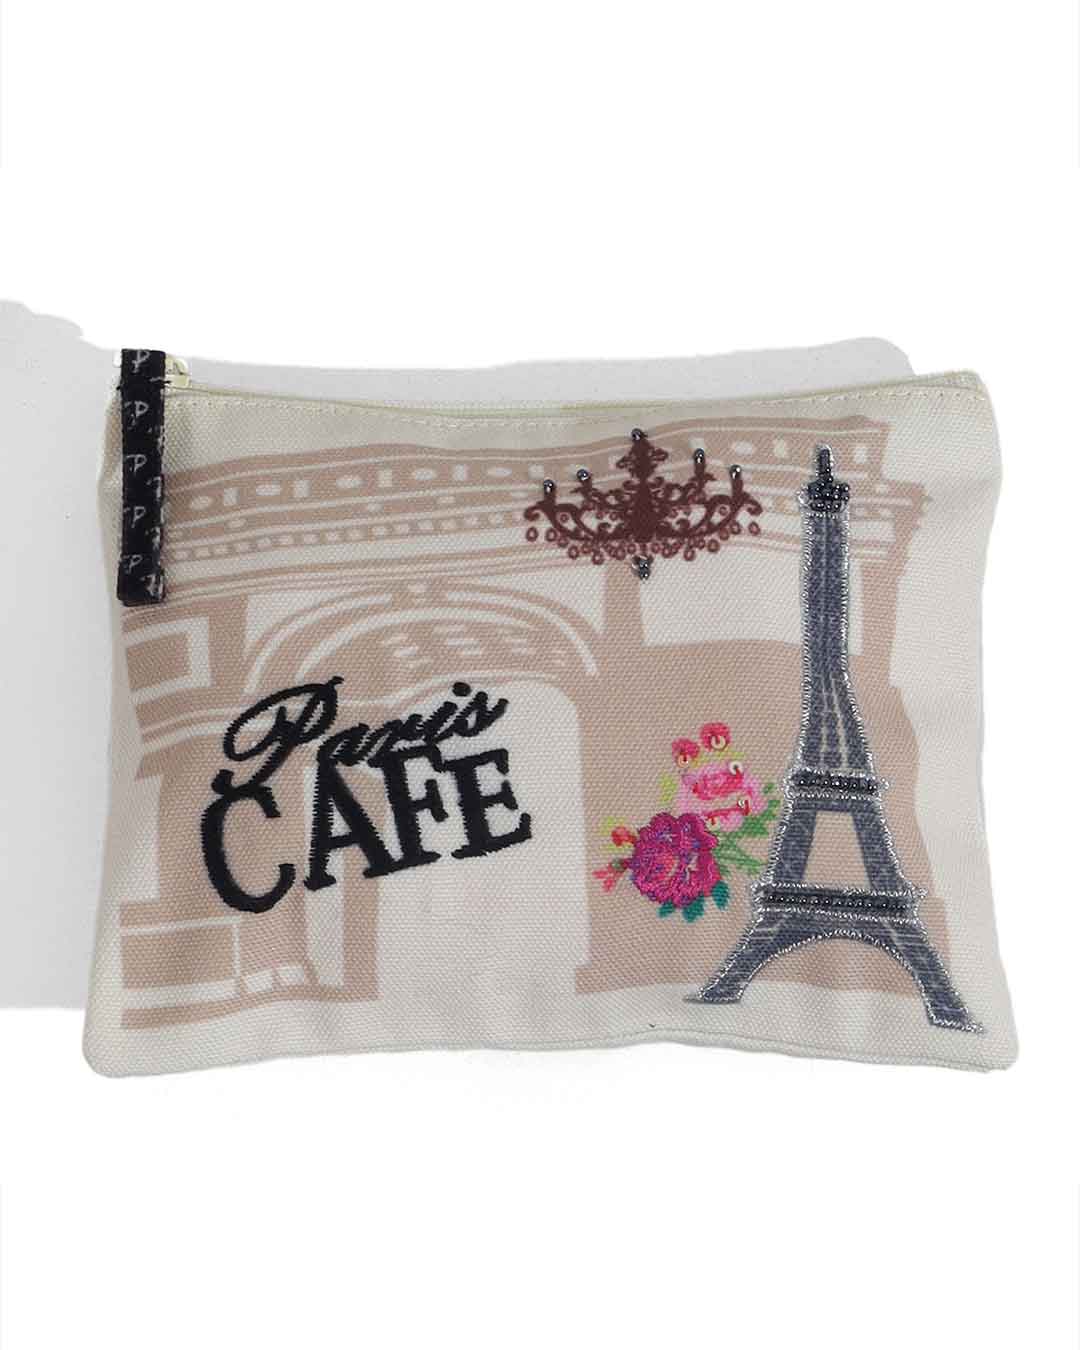 Paris Cafe, High On hapiness Coin Pouch Set of 2